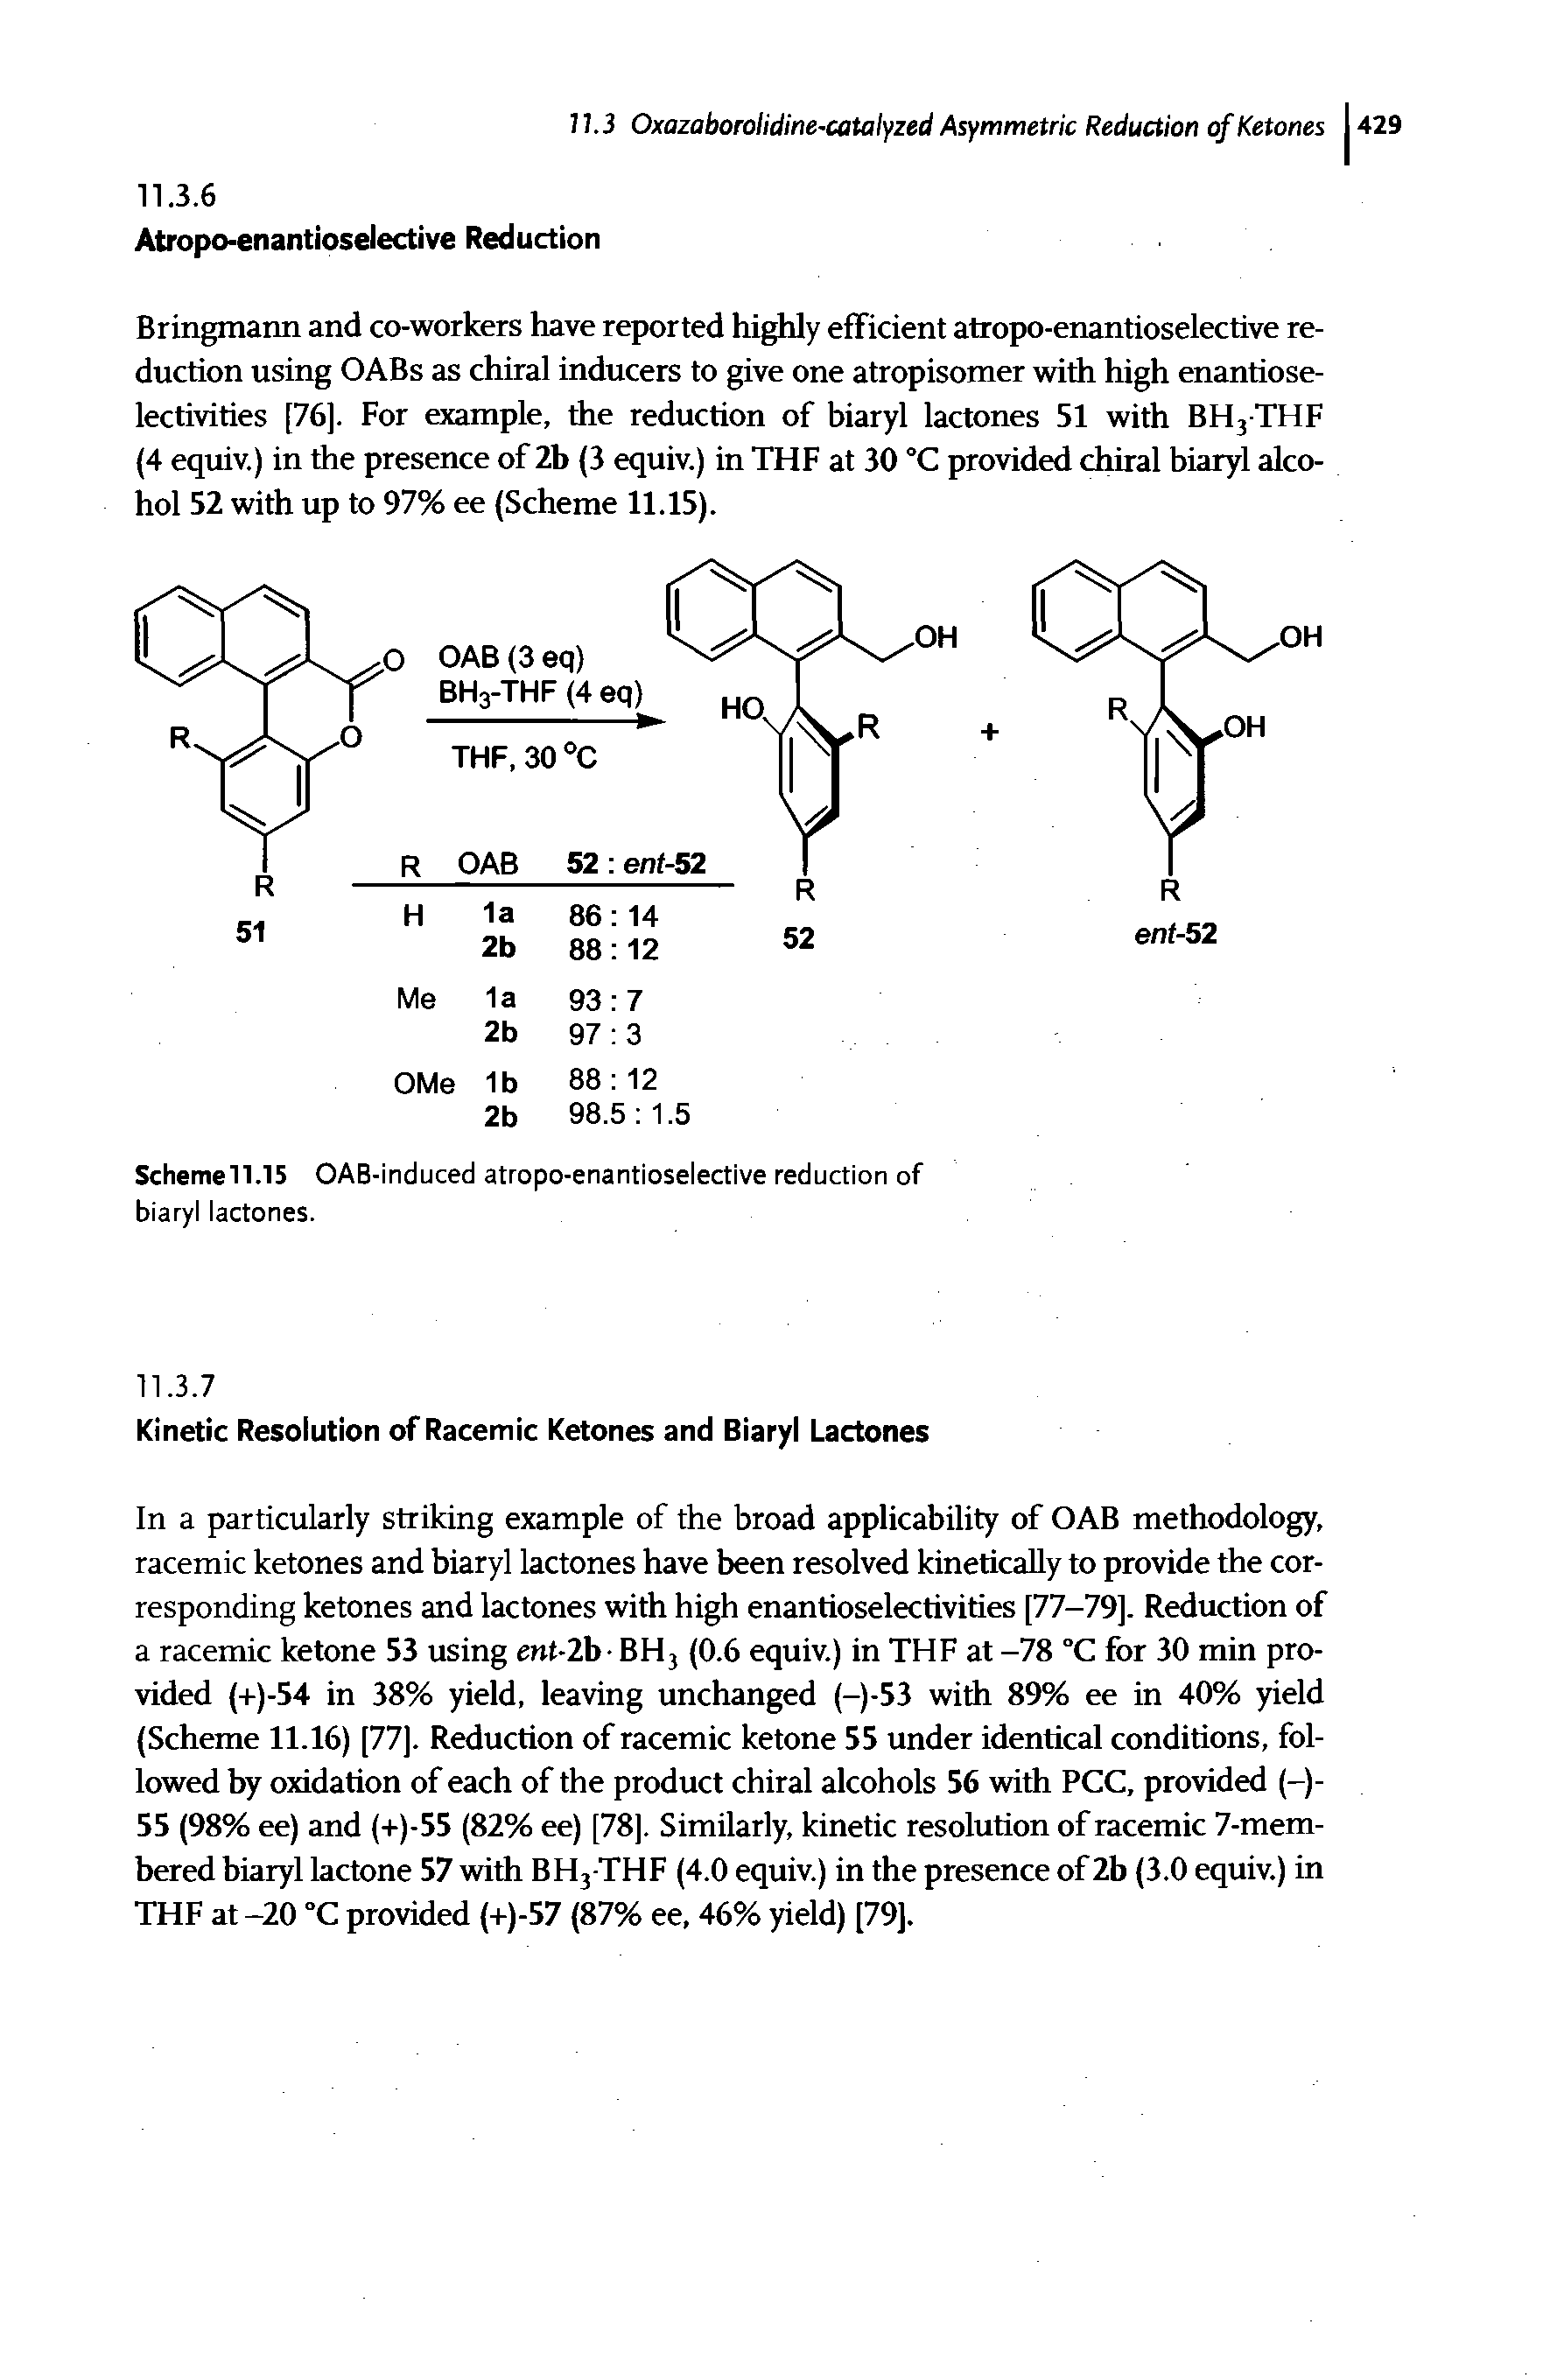 Scheme11.15 OAB-induced atropo-enantioselective reduction of biaryl lactones.